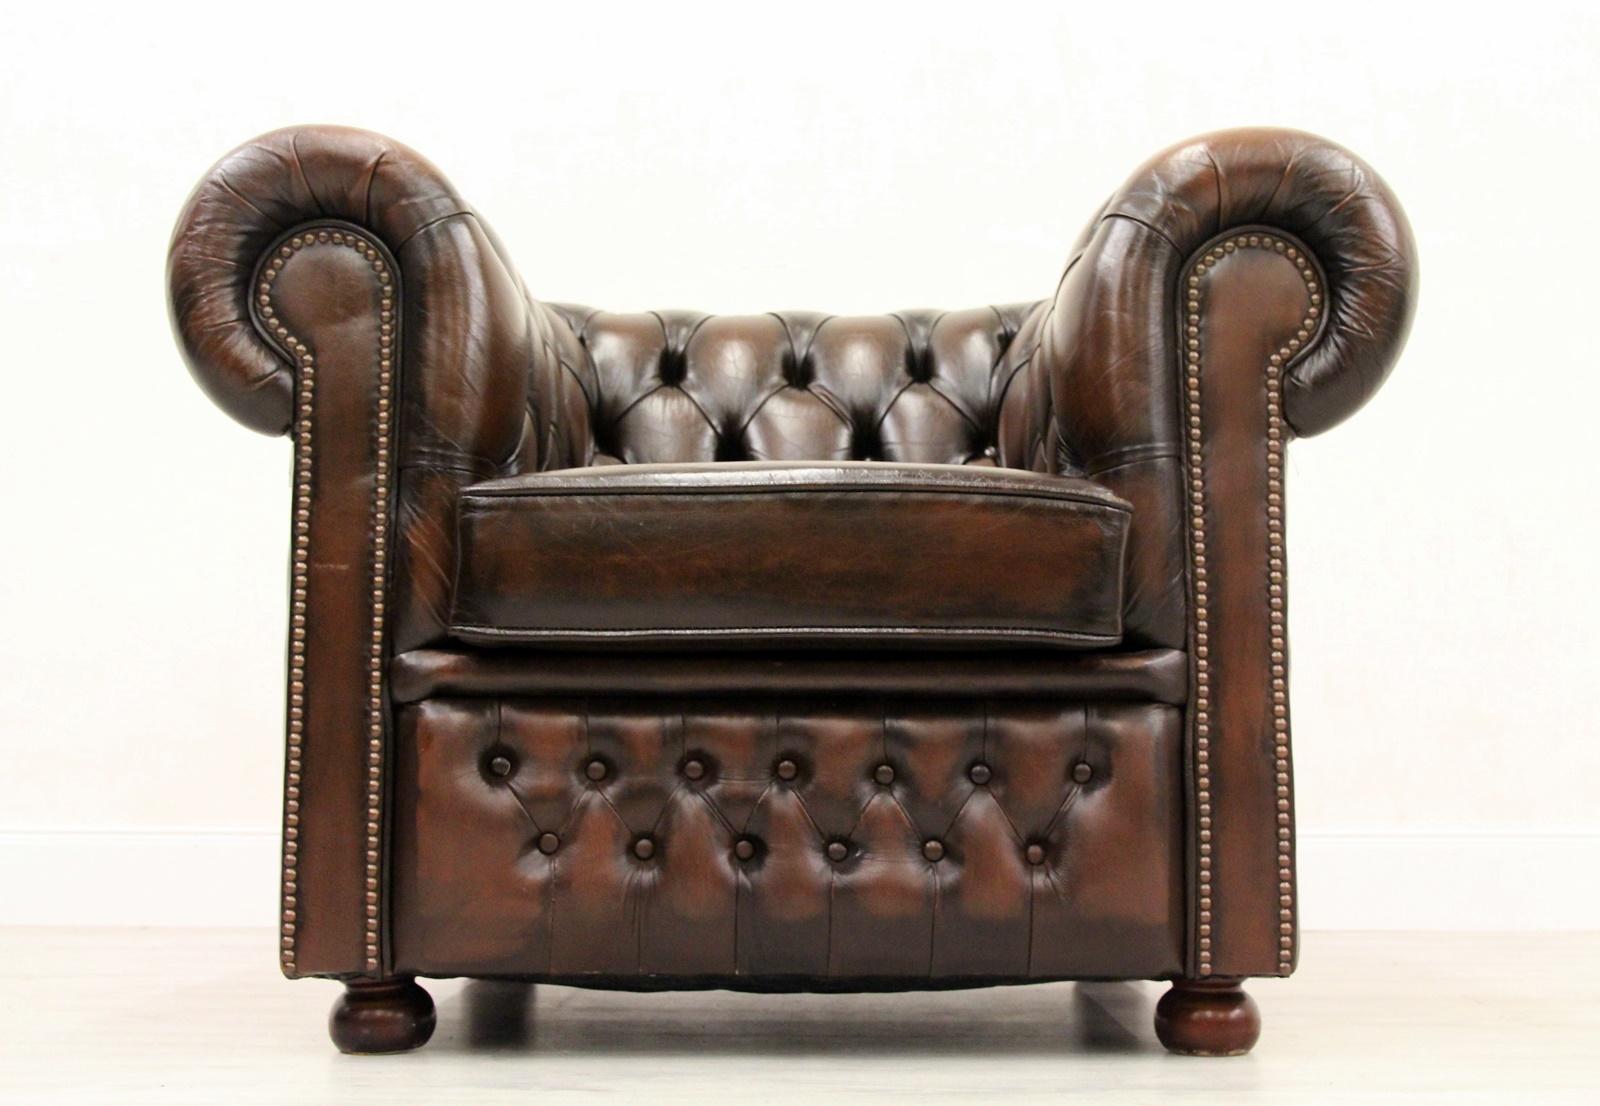 Chesterfield armchair
Armchair
Measures: Height x 75 cm, width x 100 cm, diameter x 90cm
Condition: The chair is in a very good condition for the age and still has the charm of the 